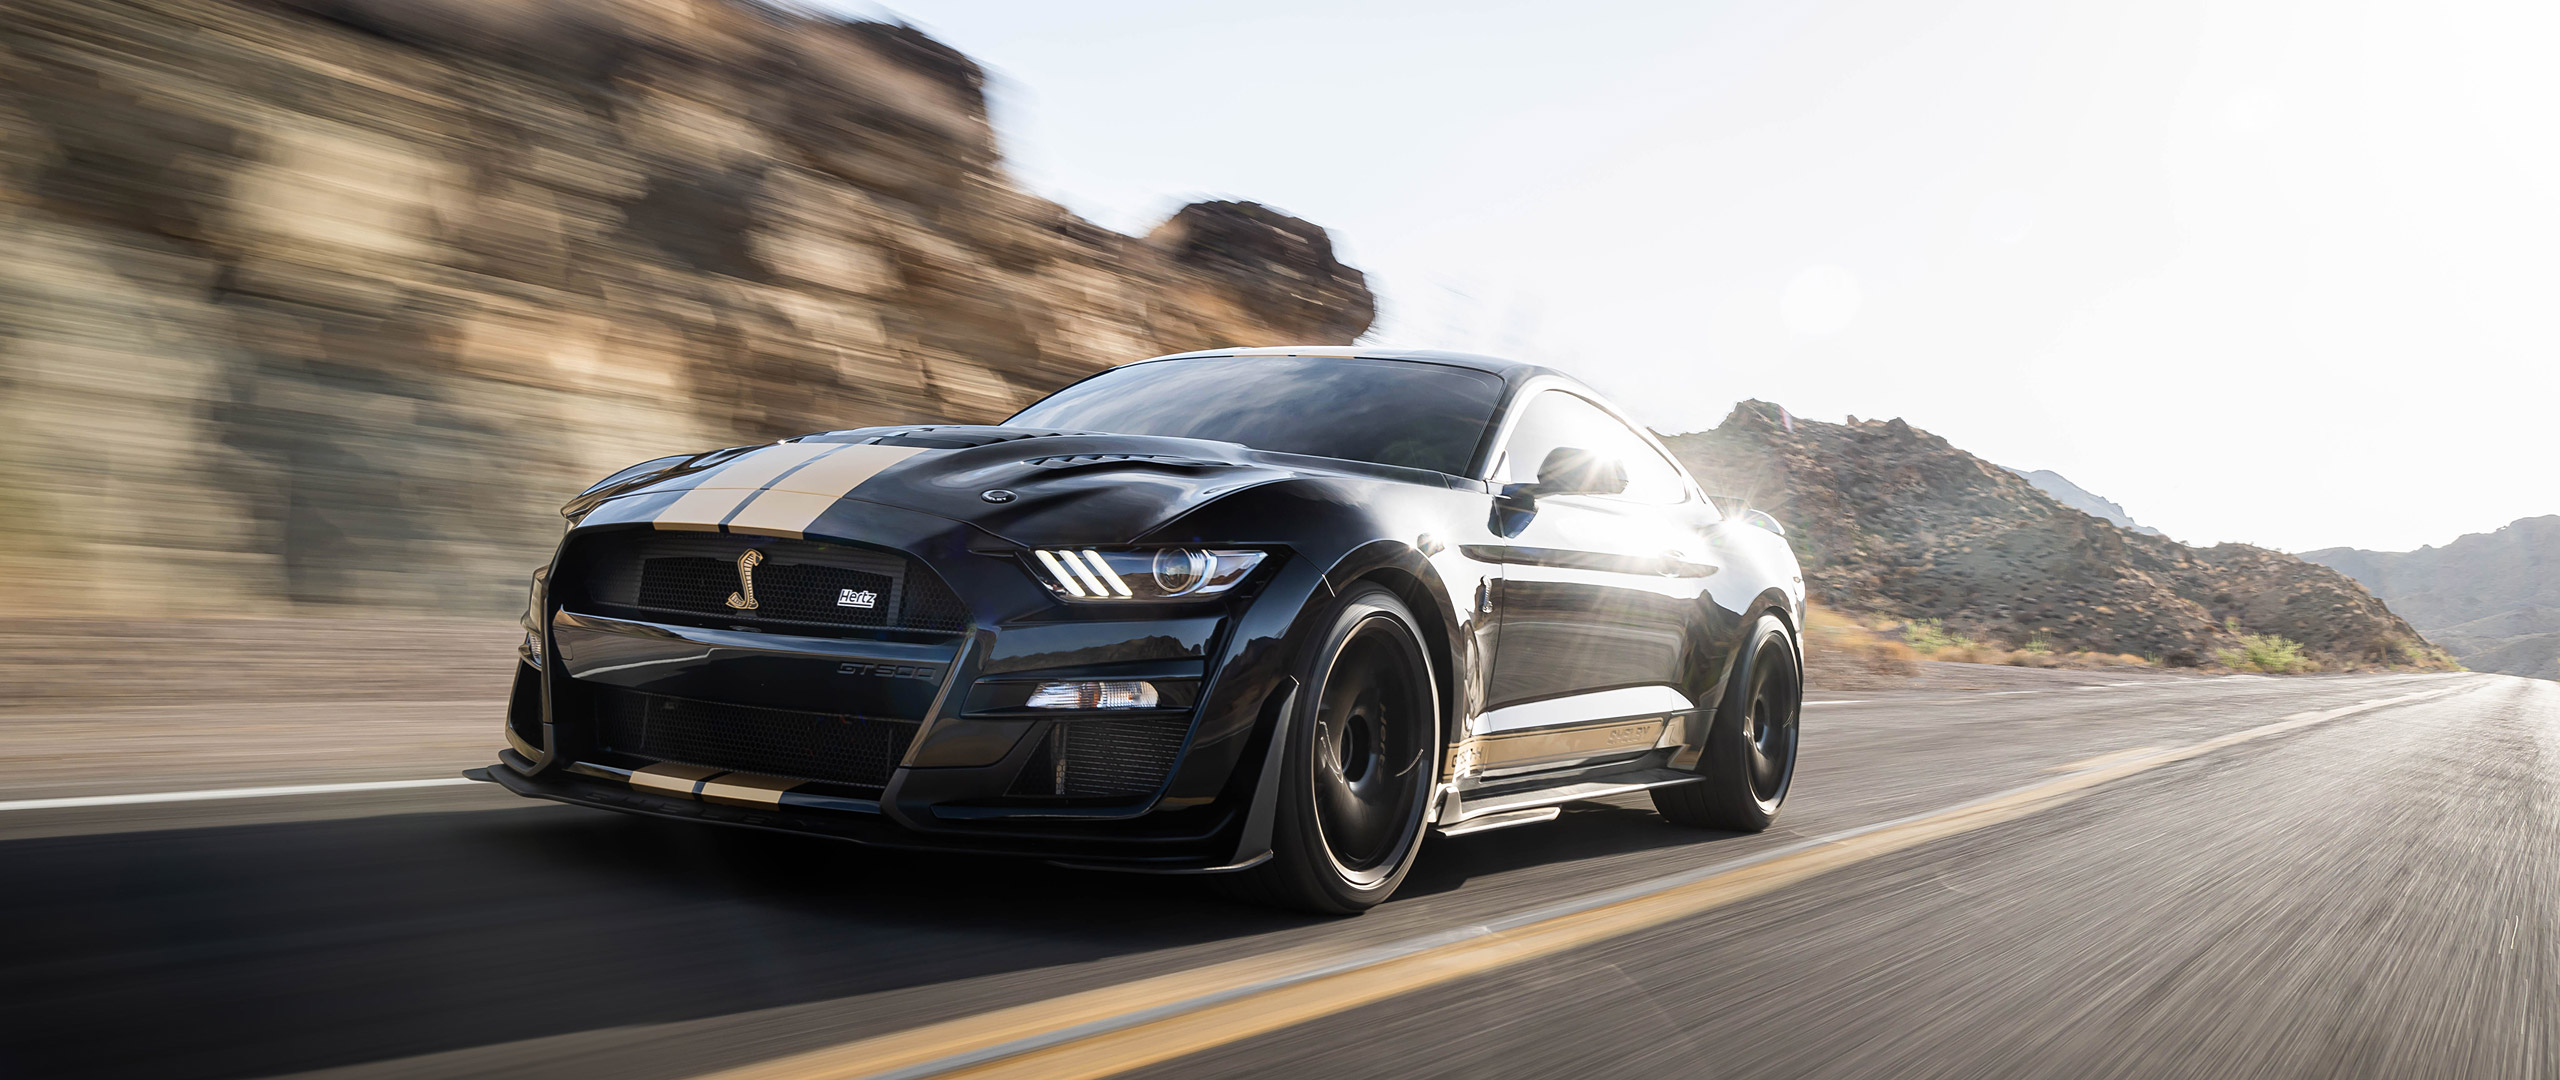  2022 Ford Mustang Shelby GT500 Wallpaper.